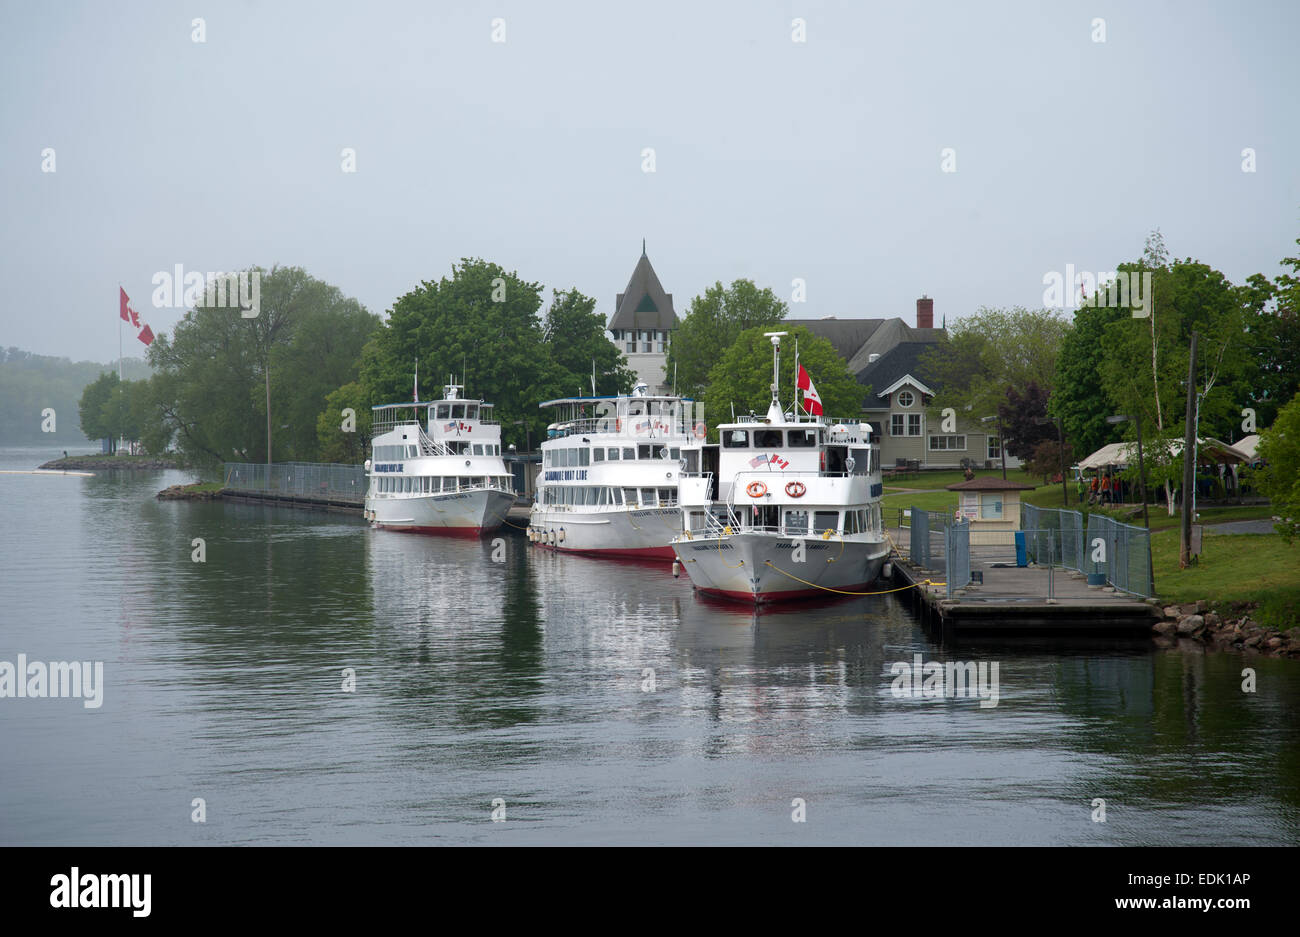 Boats belonging to the Gananoque Boat Line Thousand Islands Tour tied up at the dock, Gananoque, Ontario, Canada Stock Photo